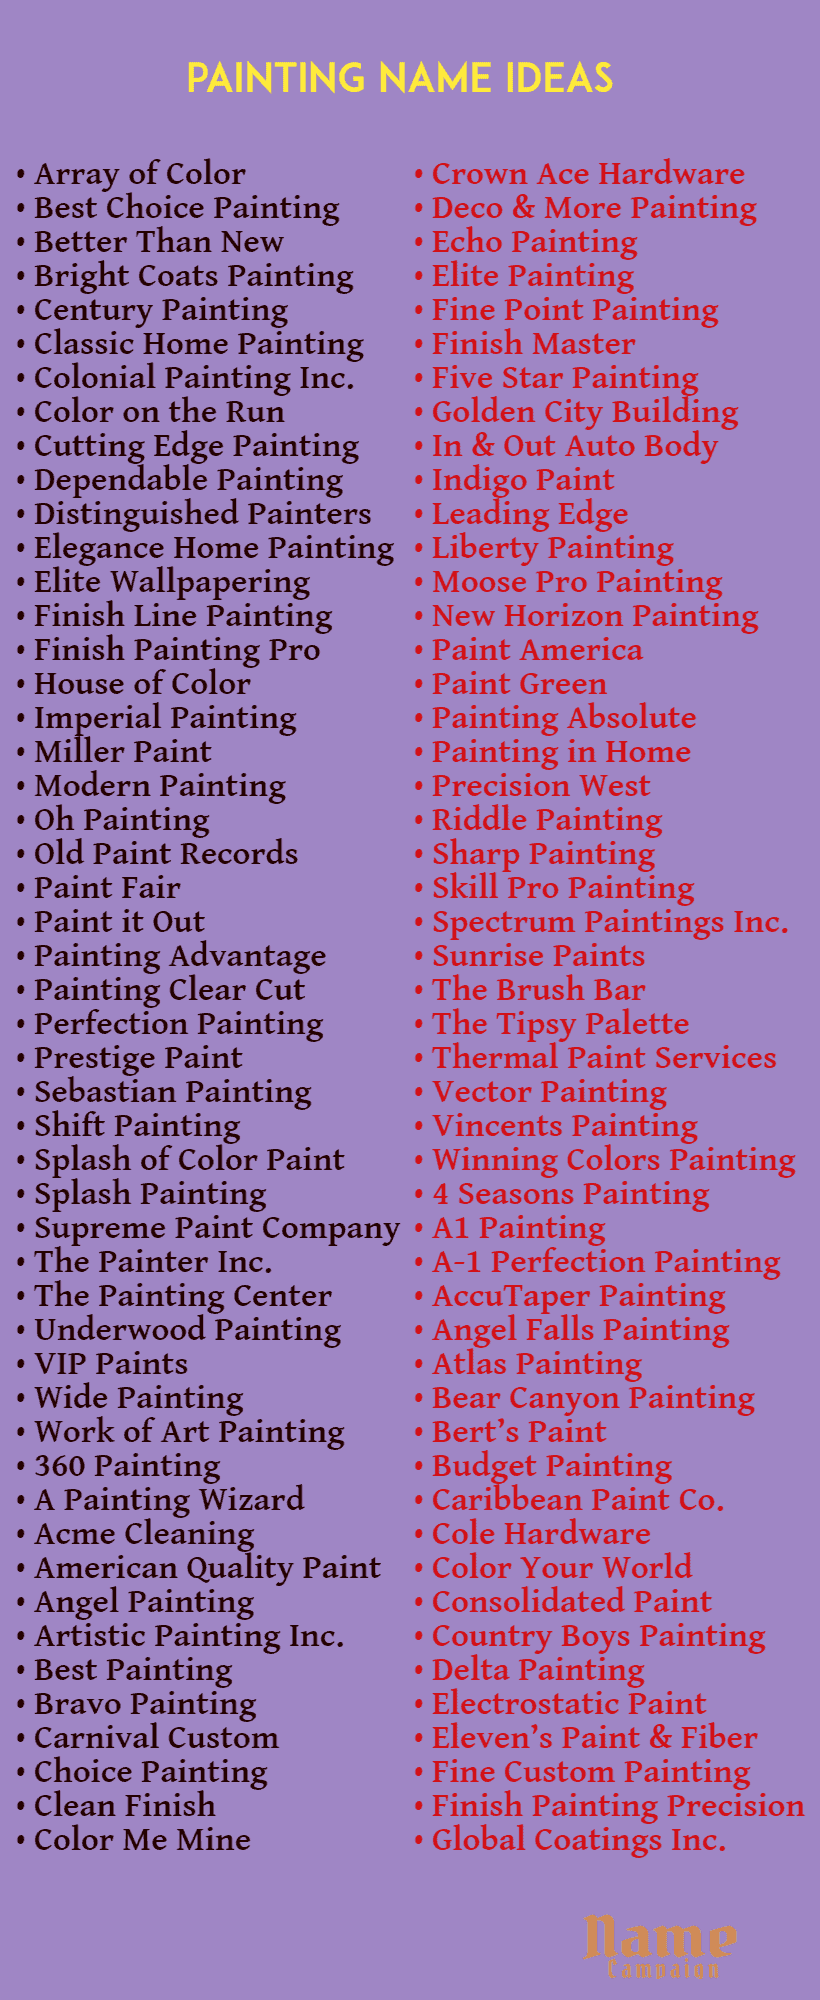 Painting names: The best painting company names